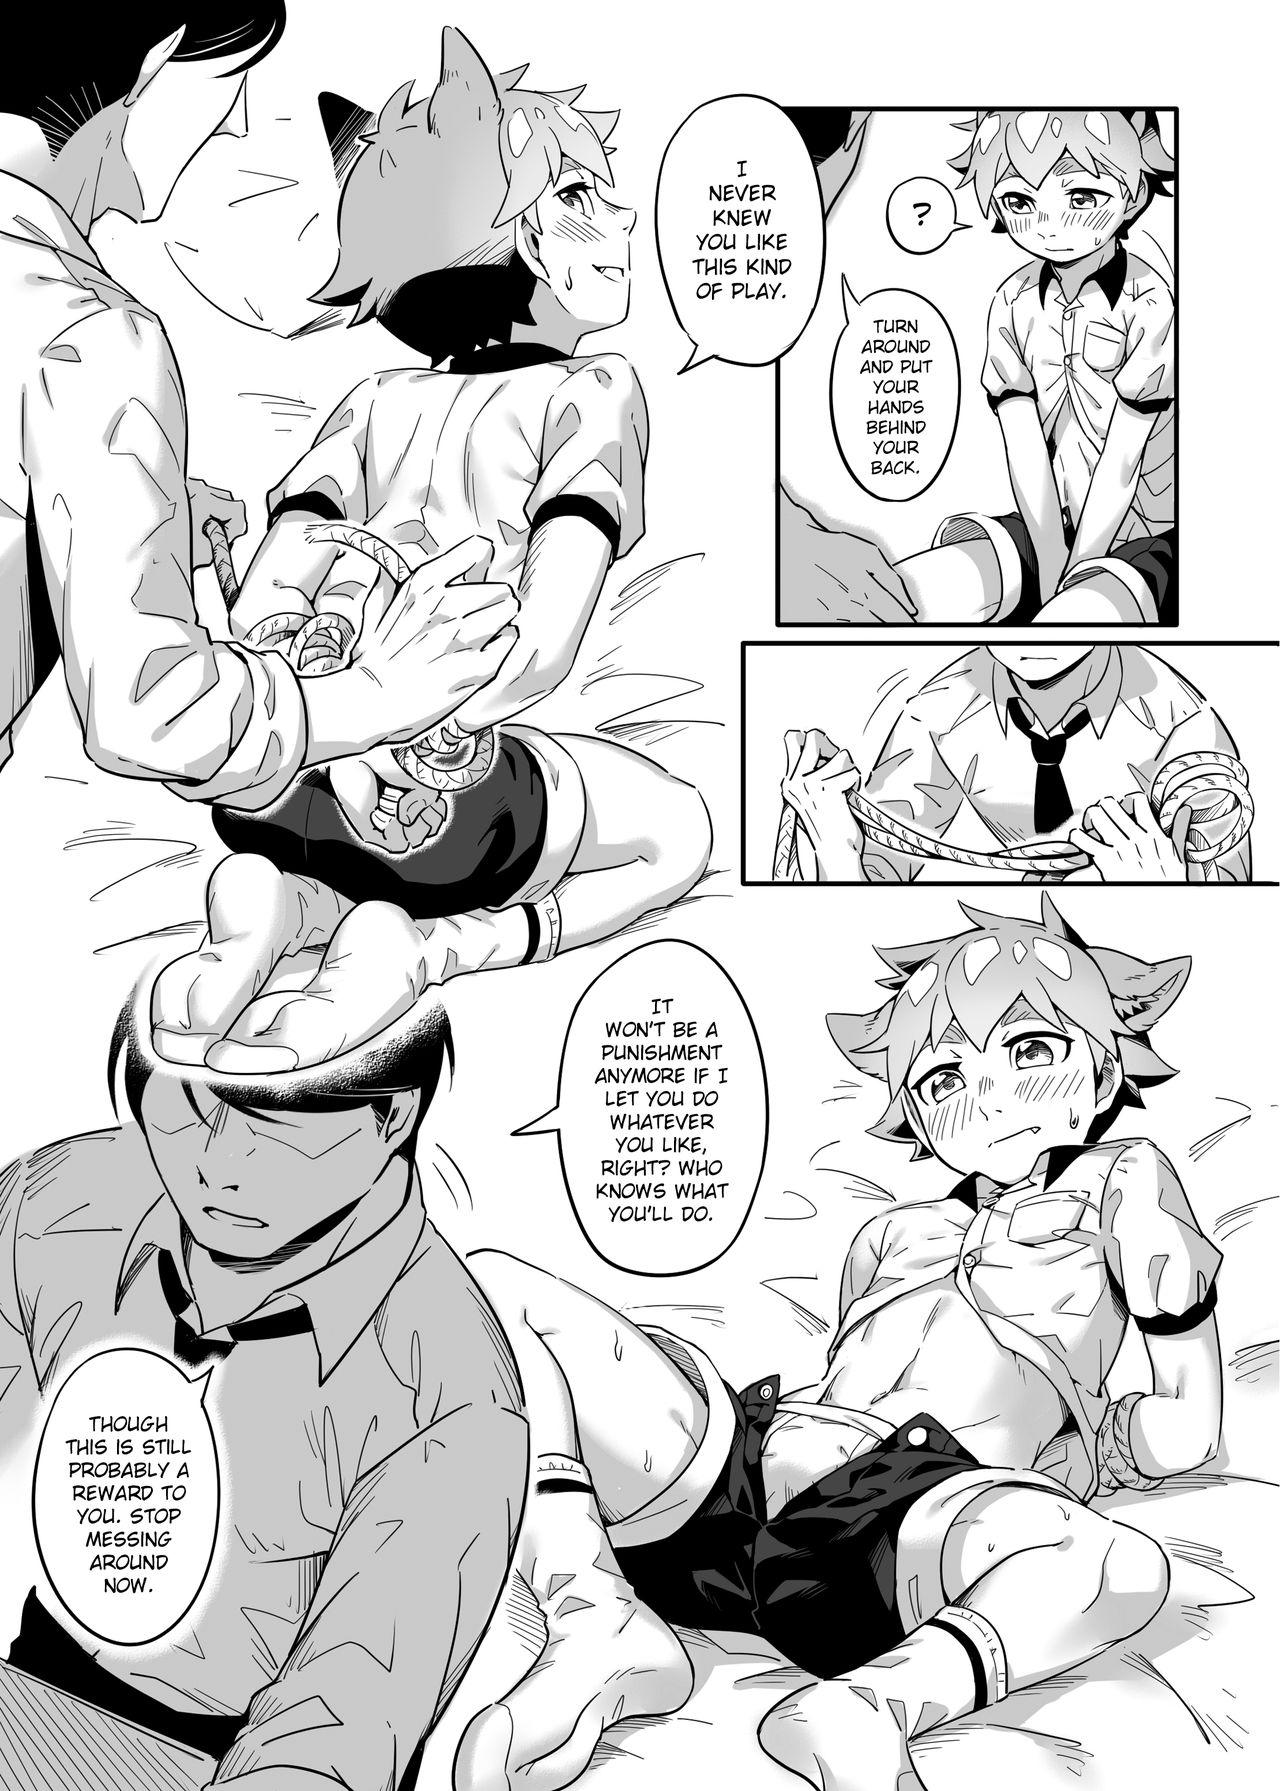 Double Blowjob The Toybox that was Confiscated by Teacher - Original Unshaved - Page 7